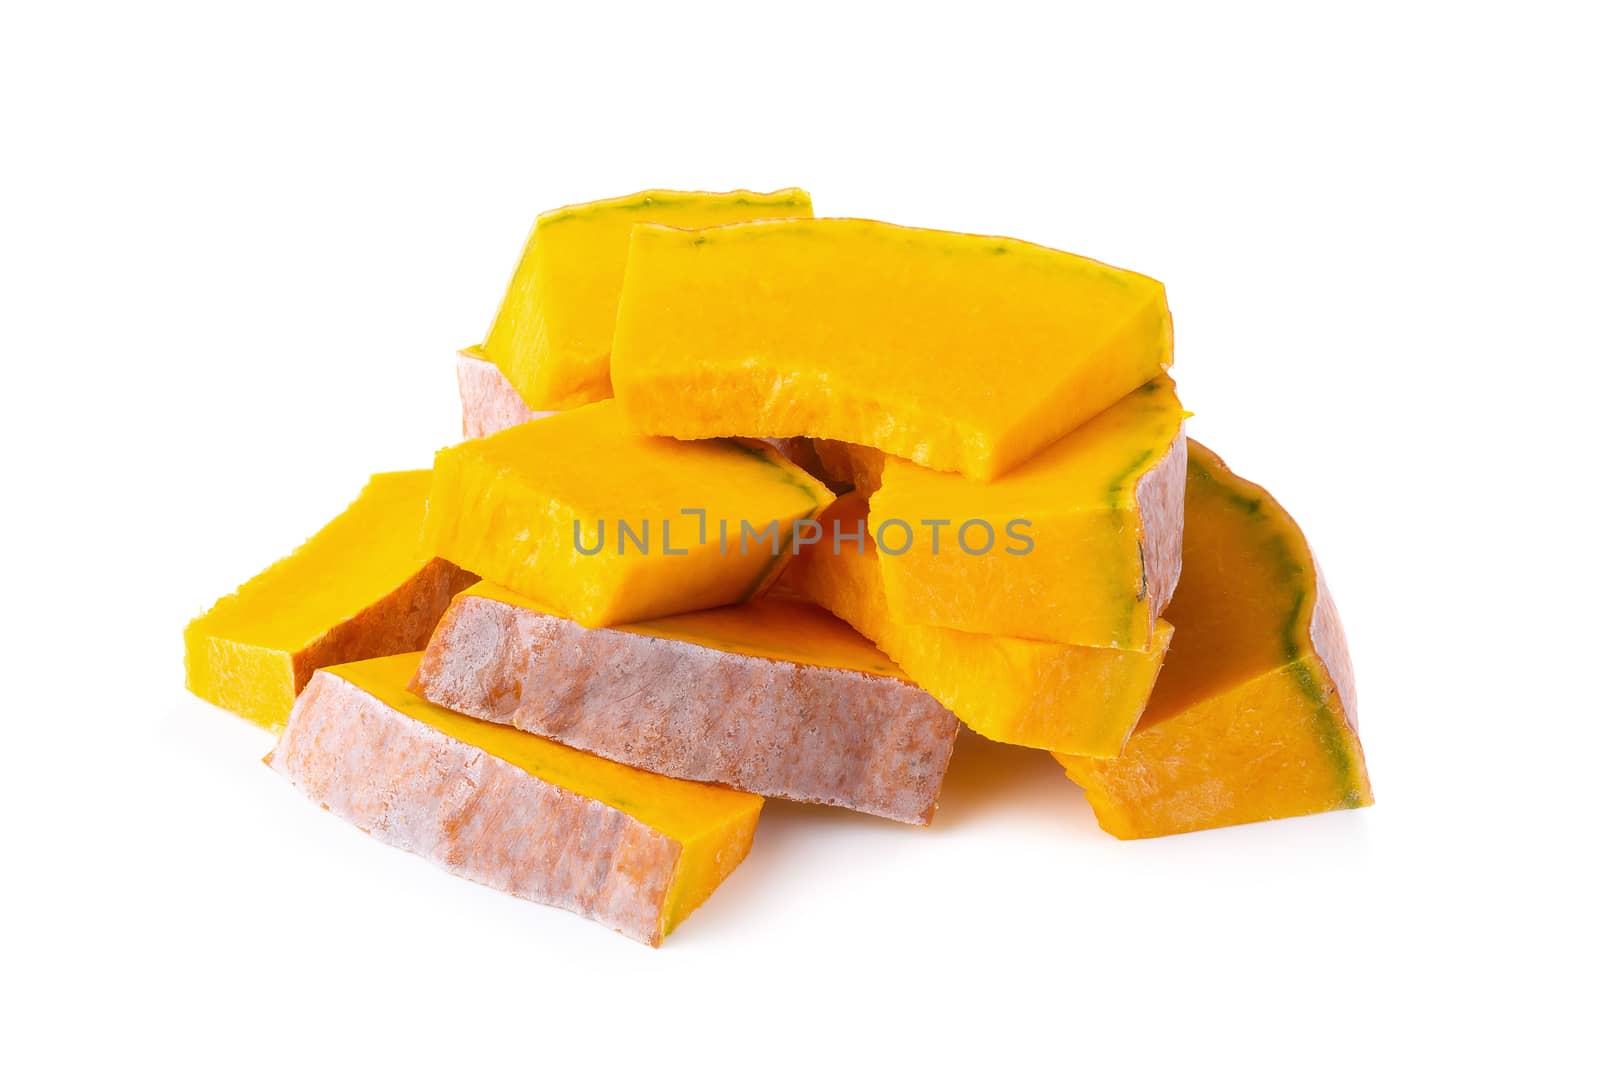 Slice of pumpkin isolated on a white background.